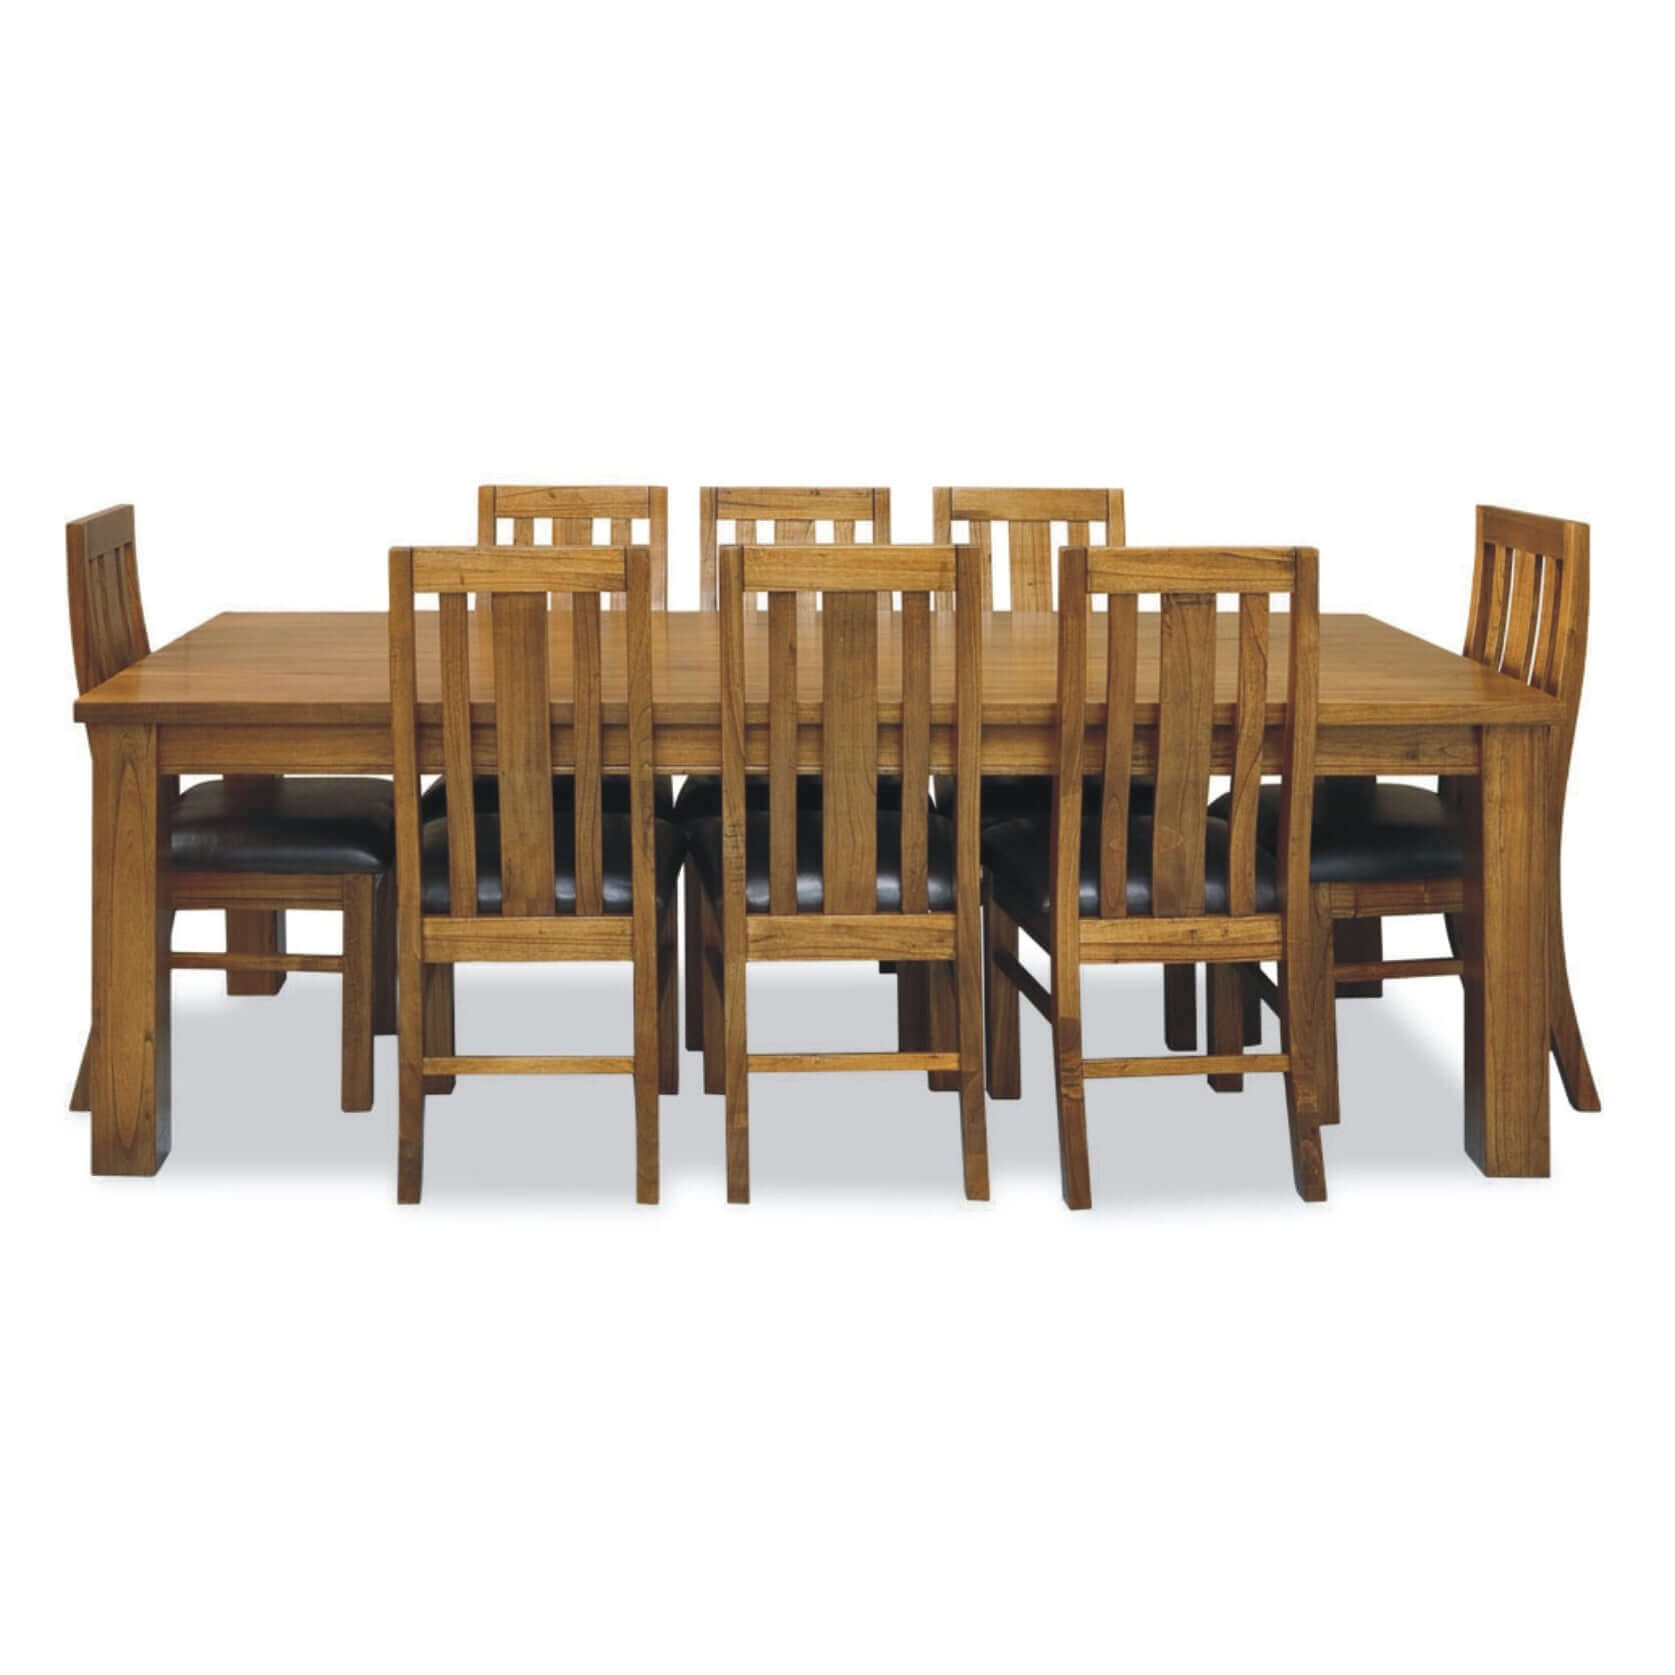 Birdsville 9pc Dining Set 225cm Table 8 PU Seat Chair Solid Mt Ash Wood - Brown-Upinteriors